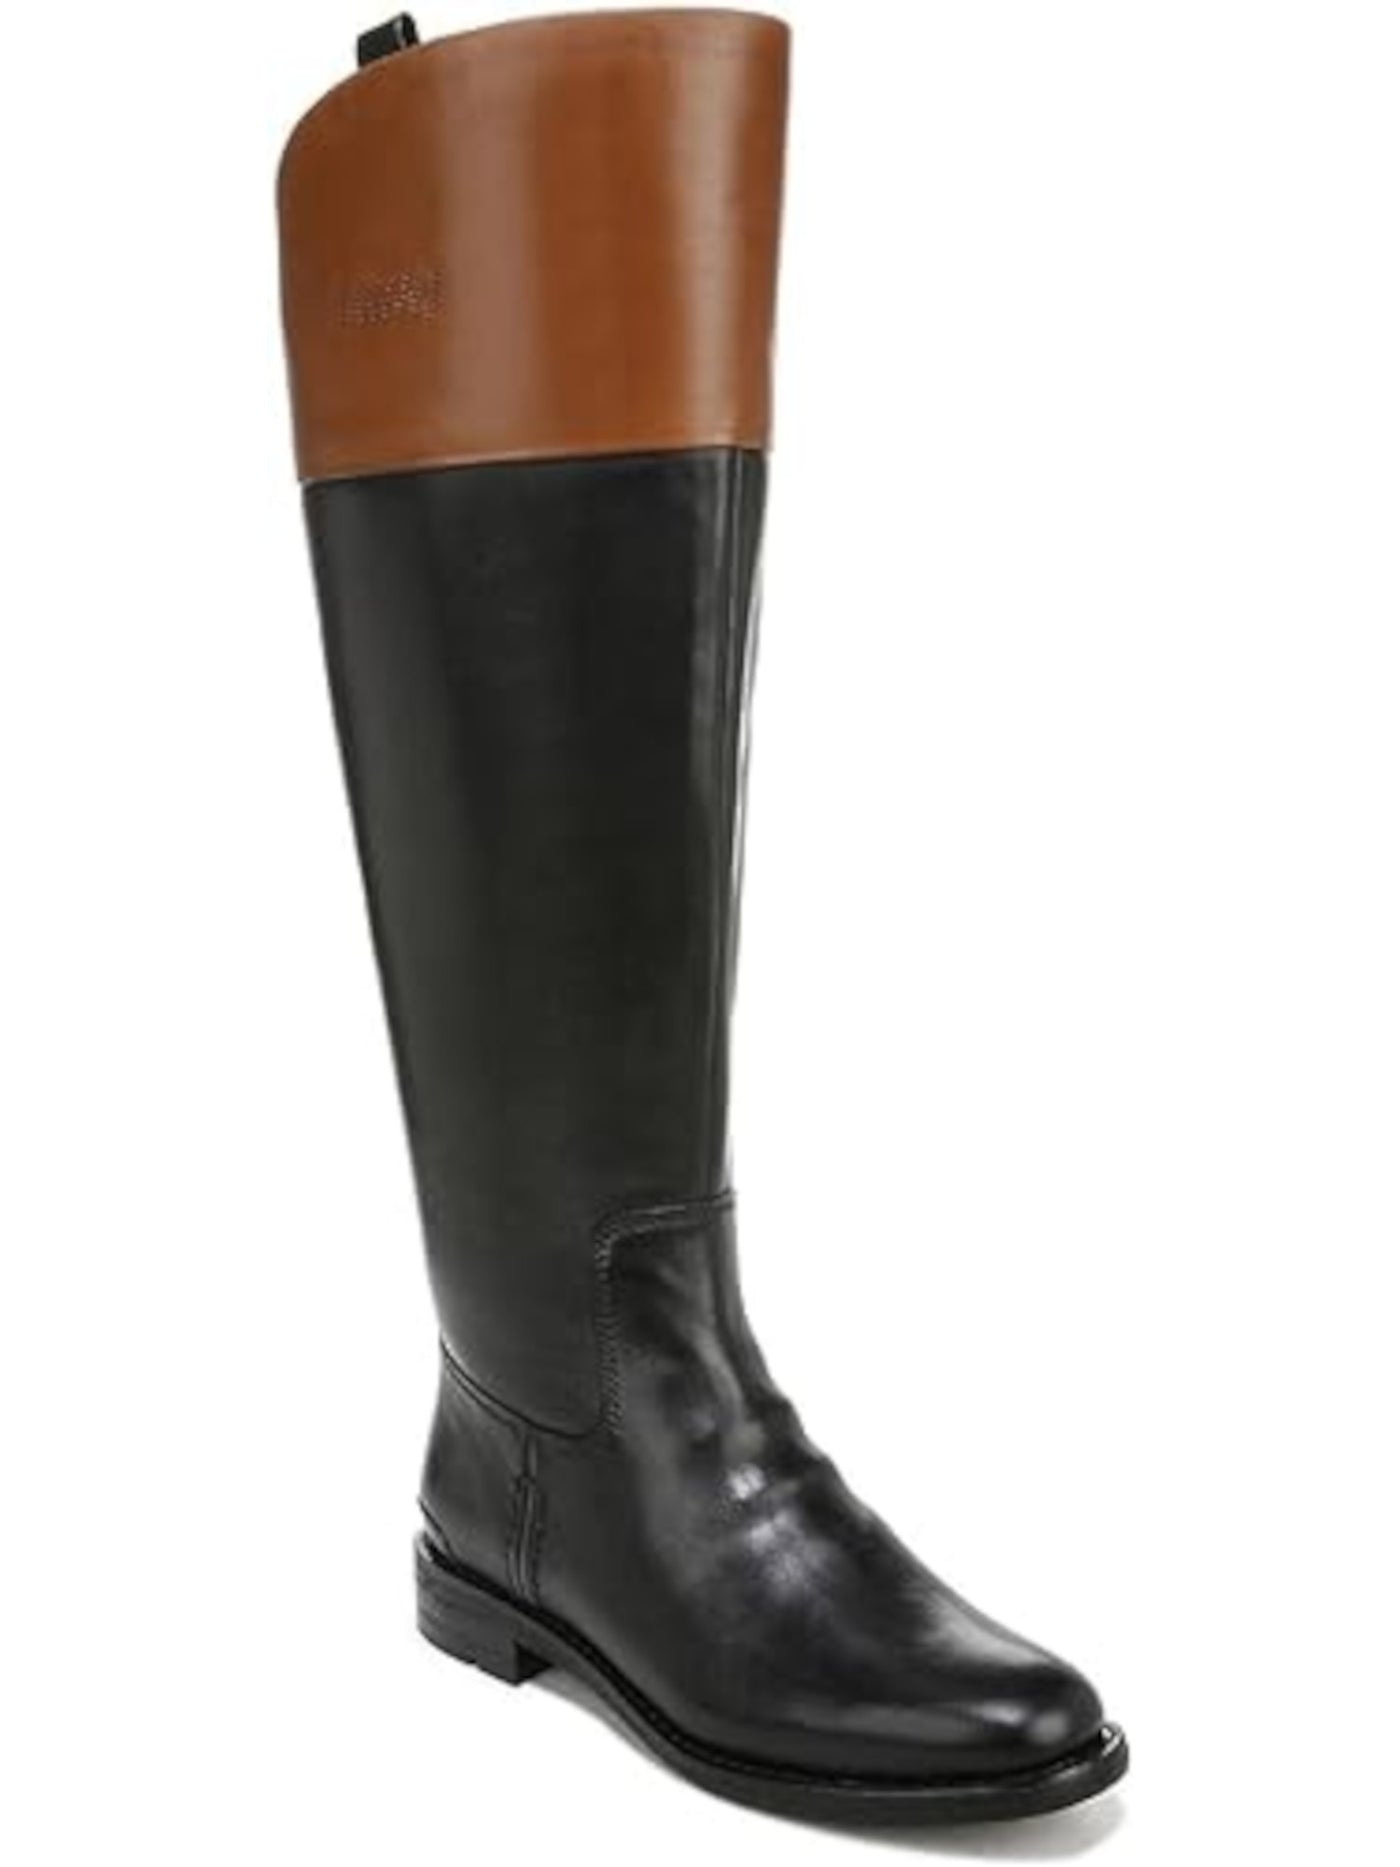 FRANCO SARTO Womens Black Color Block Side Pull-Tabs Wide Calf Padded Meyer Almond Toe Block Heel Zip-Up Leather Riding Boot 9 M WC